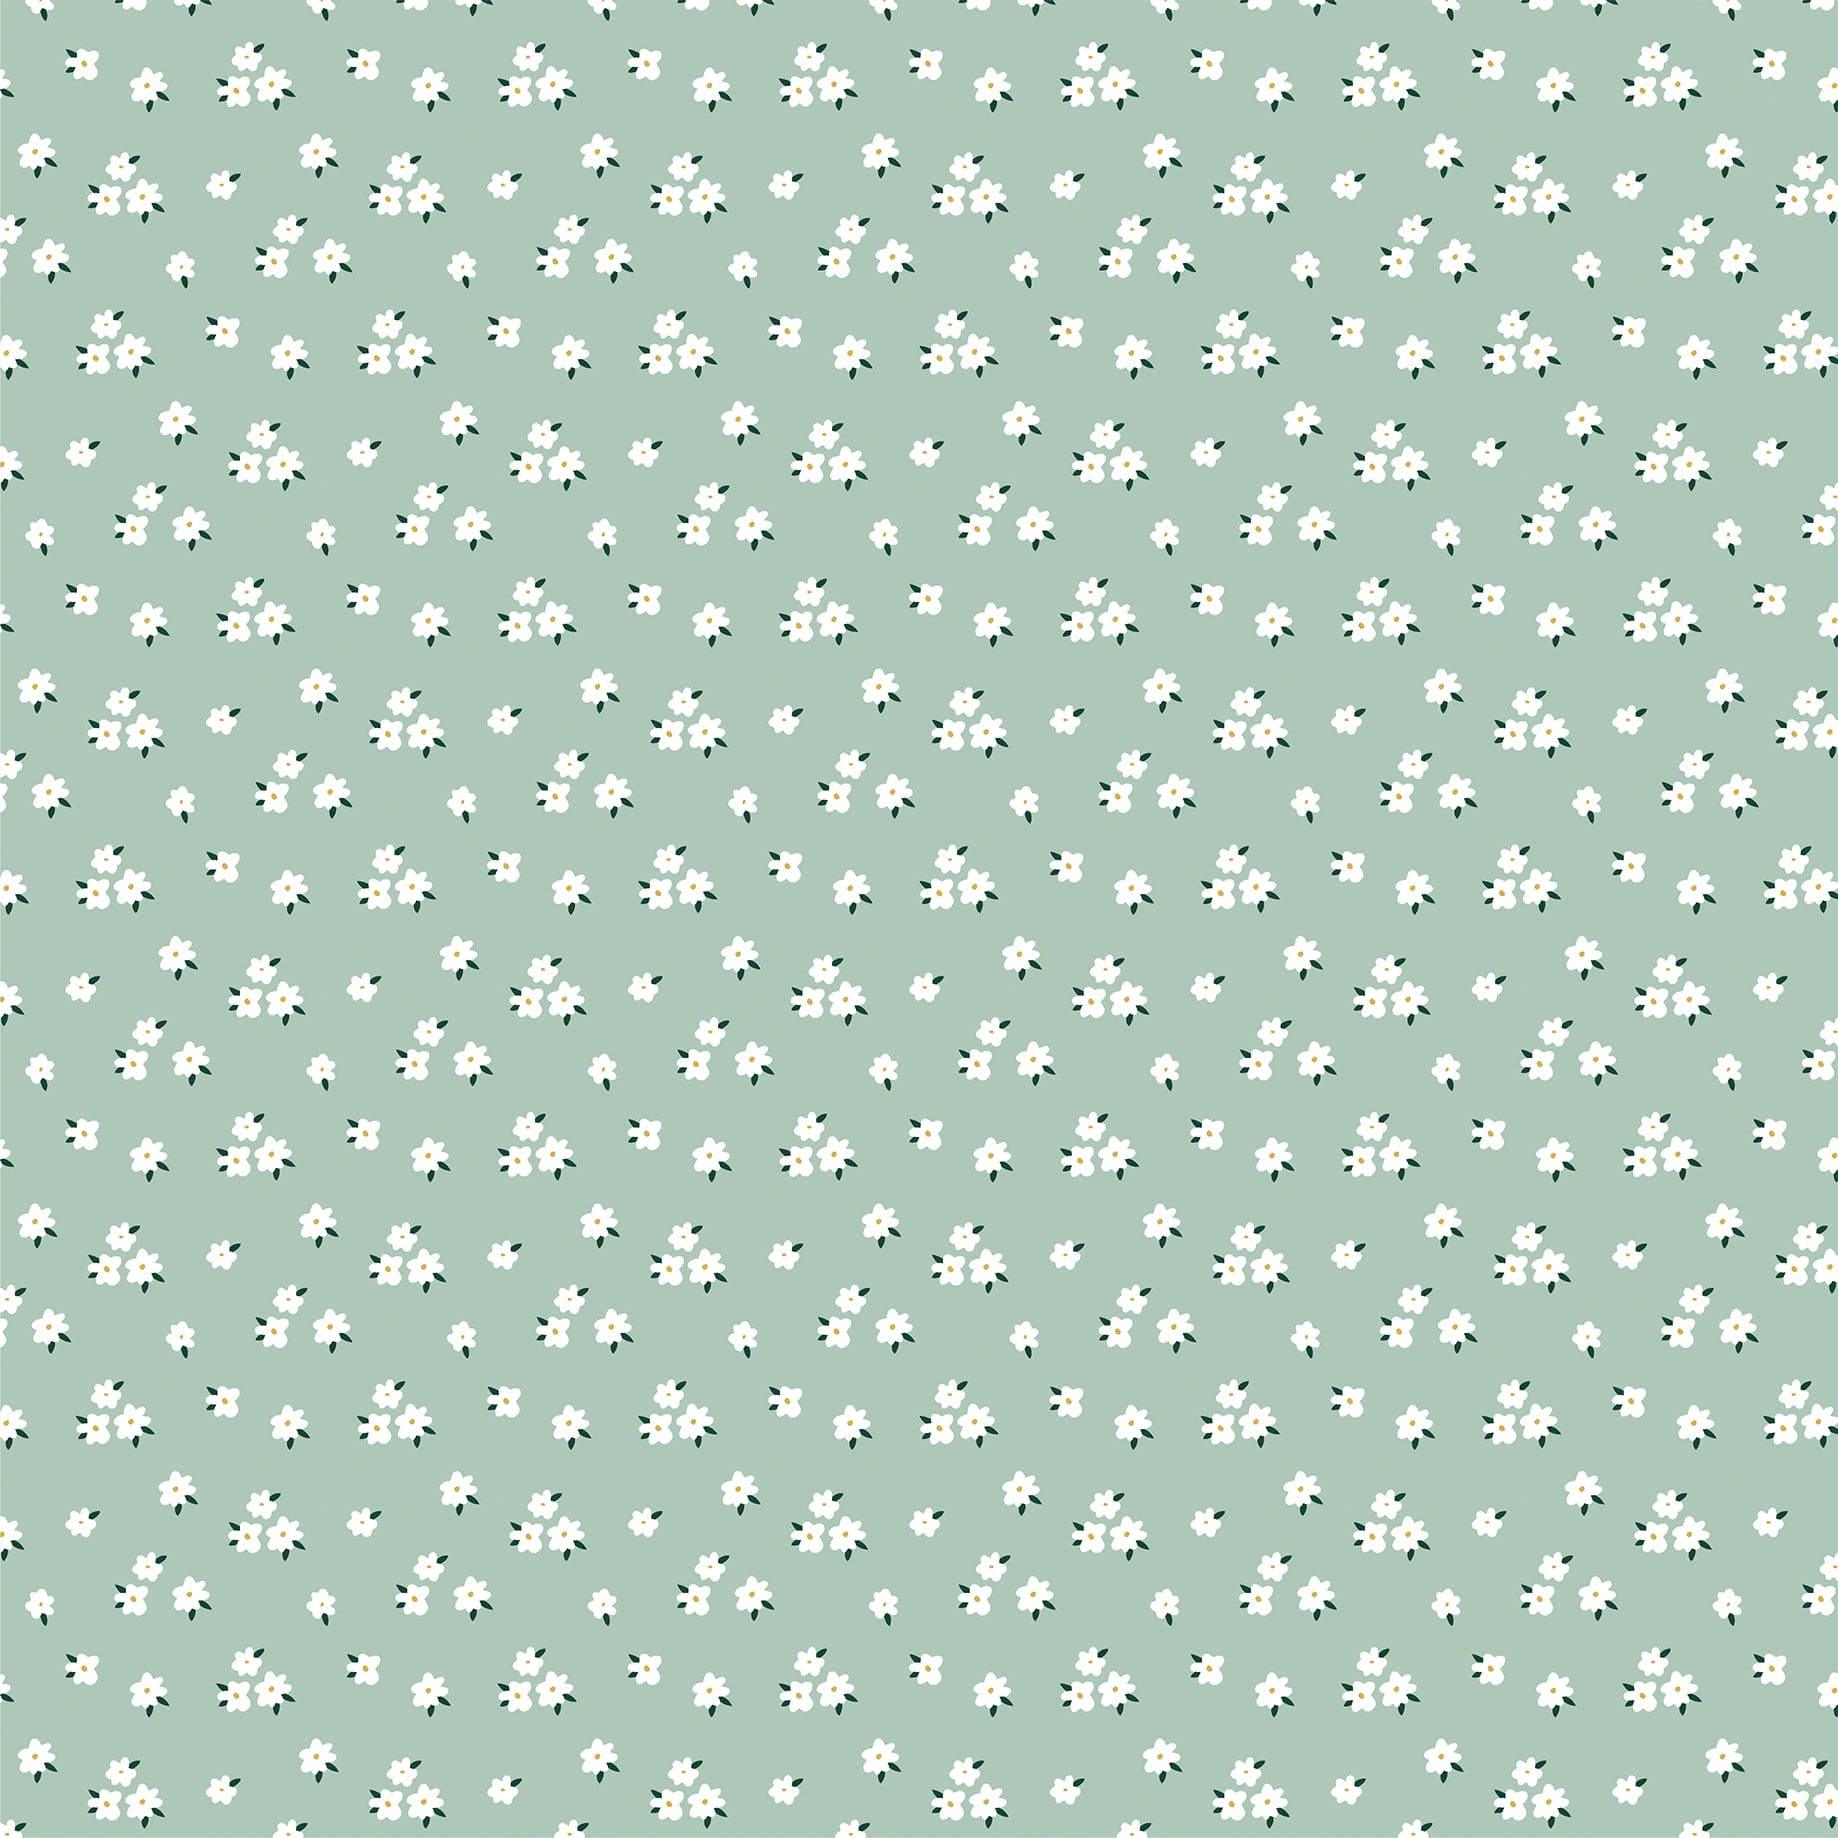 Let's Create Collection Cut It Out 12 x 12 Double-Sided Scrapbook Paper by Echo Park Paper - Scrapbook Supply Companies